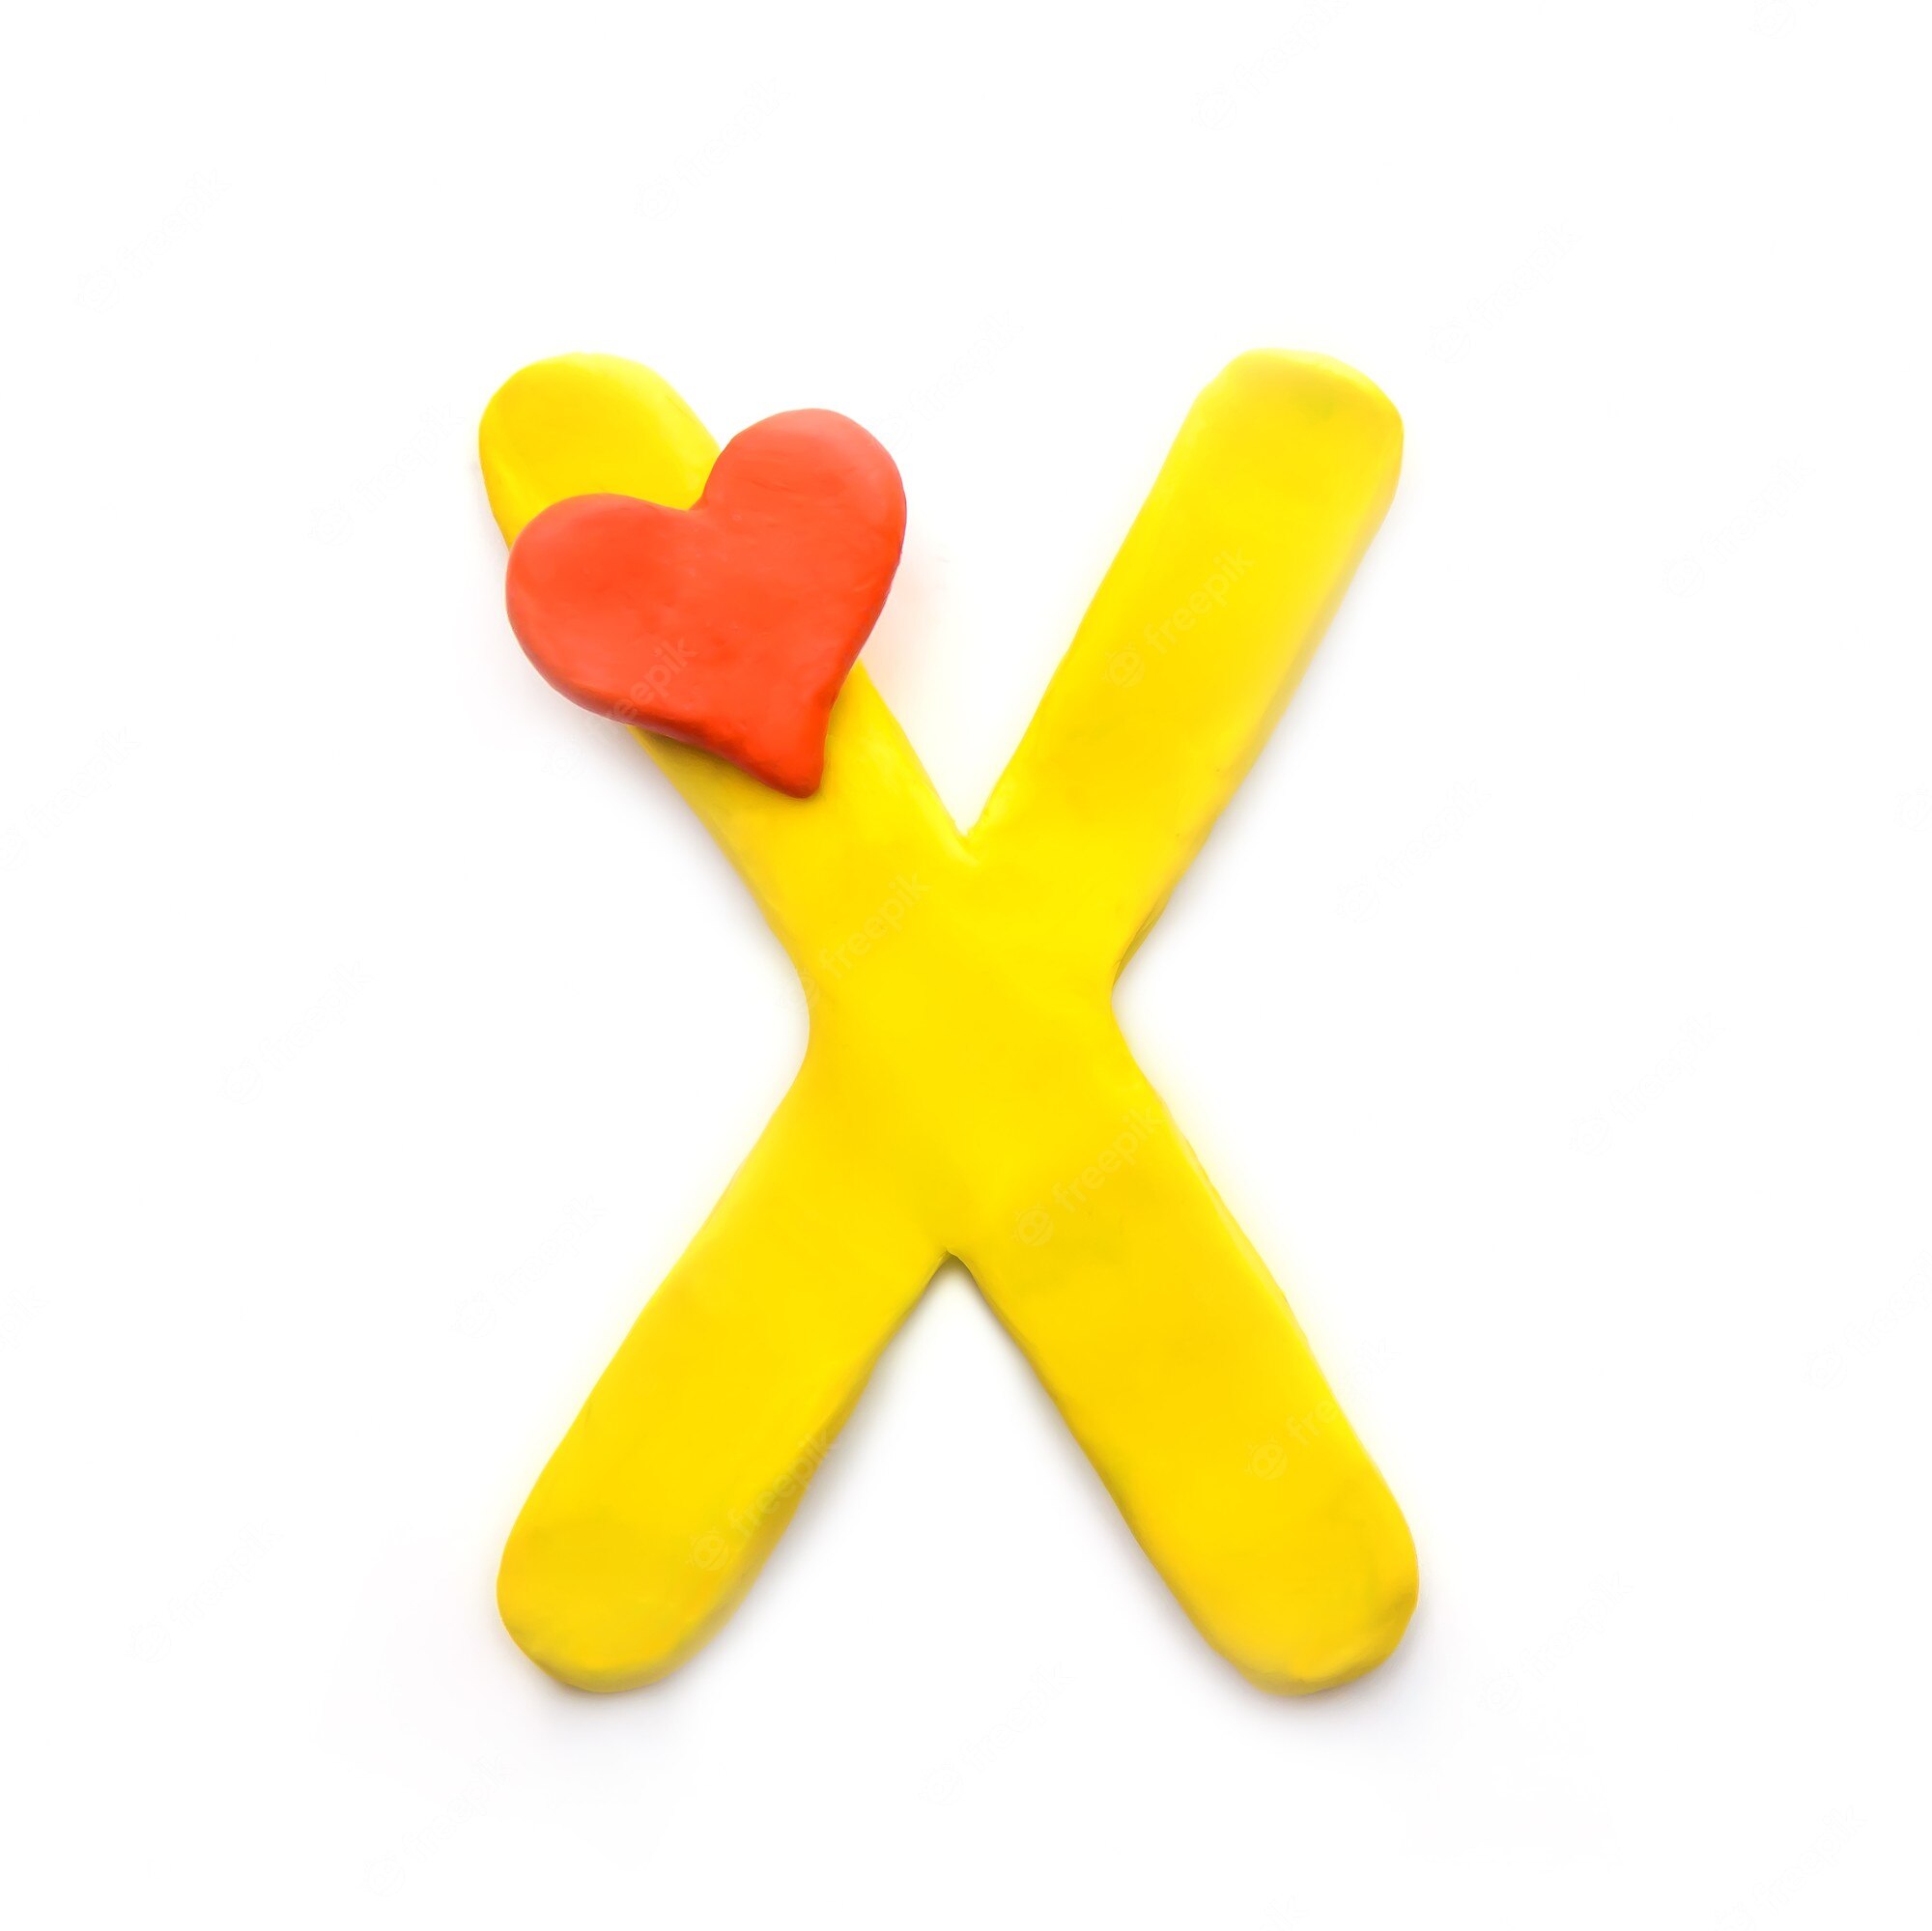 yellow plasticine letter x english alphabet with red heart meaning love 131240 1714